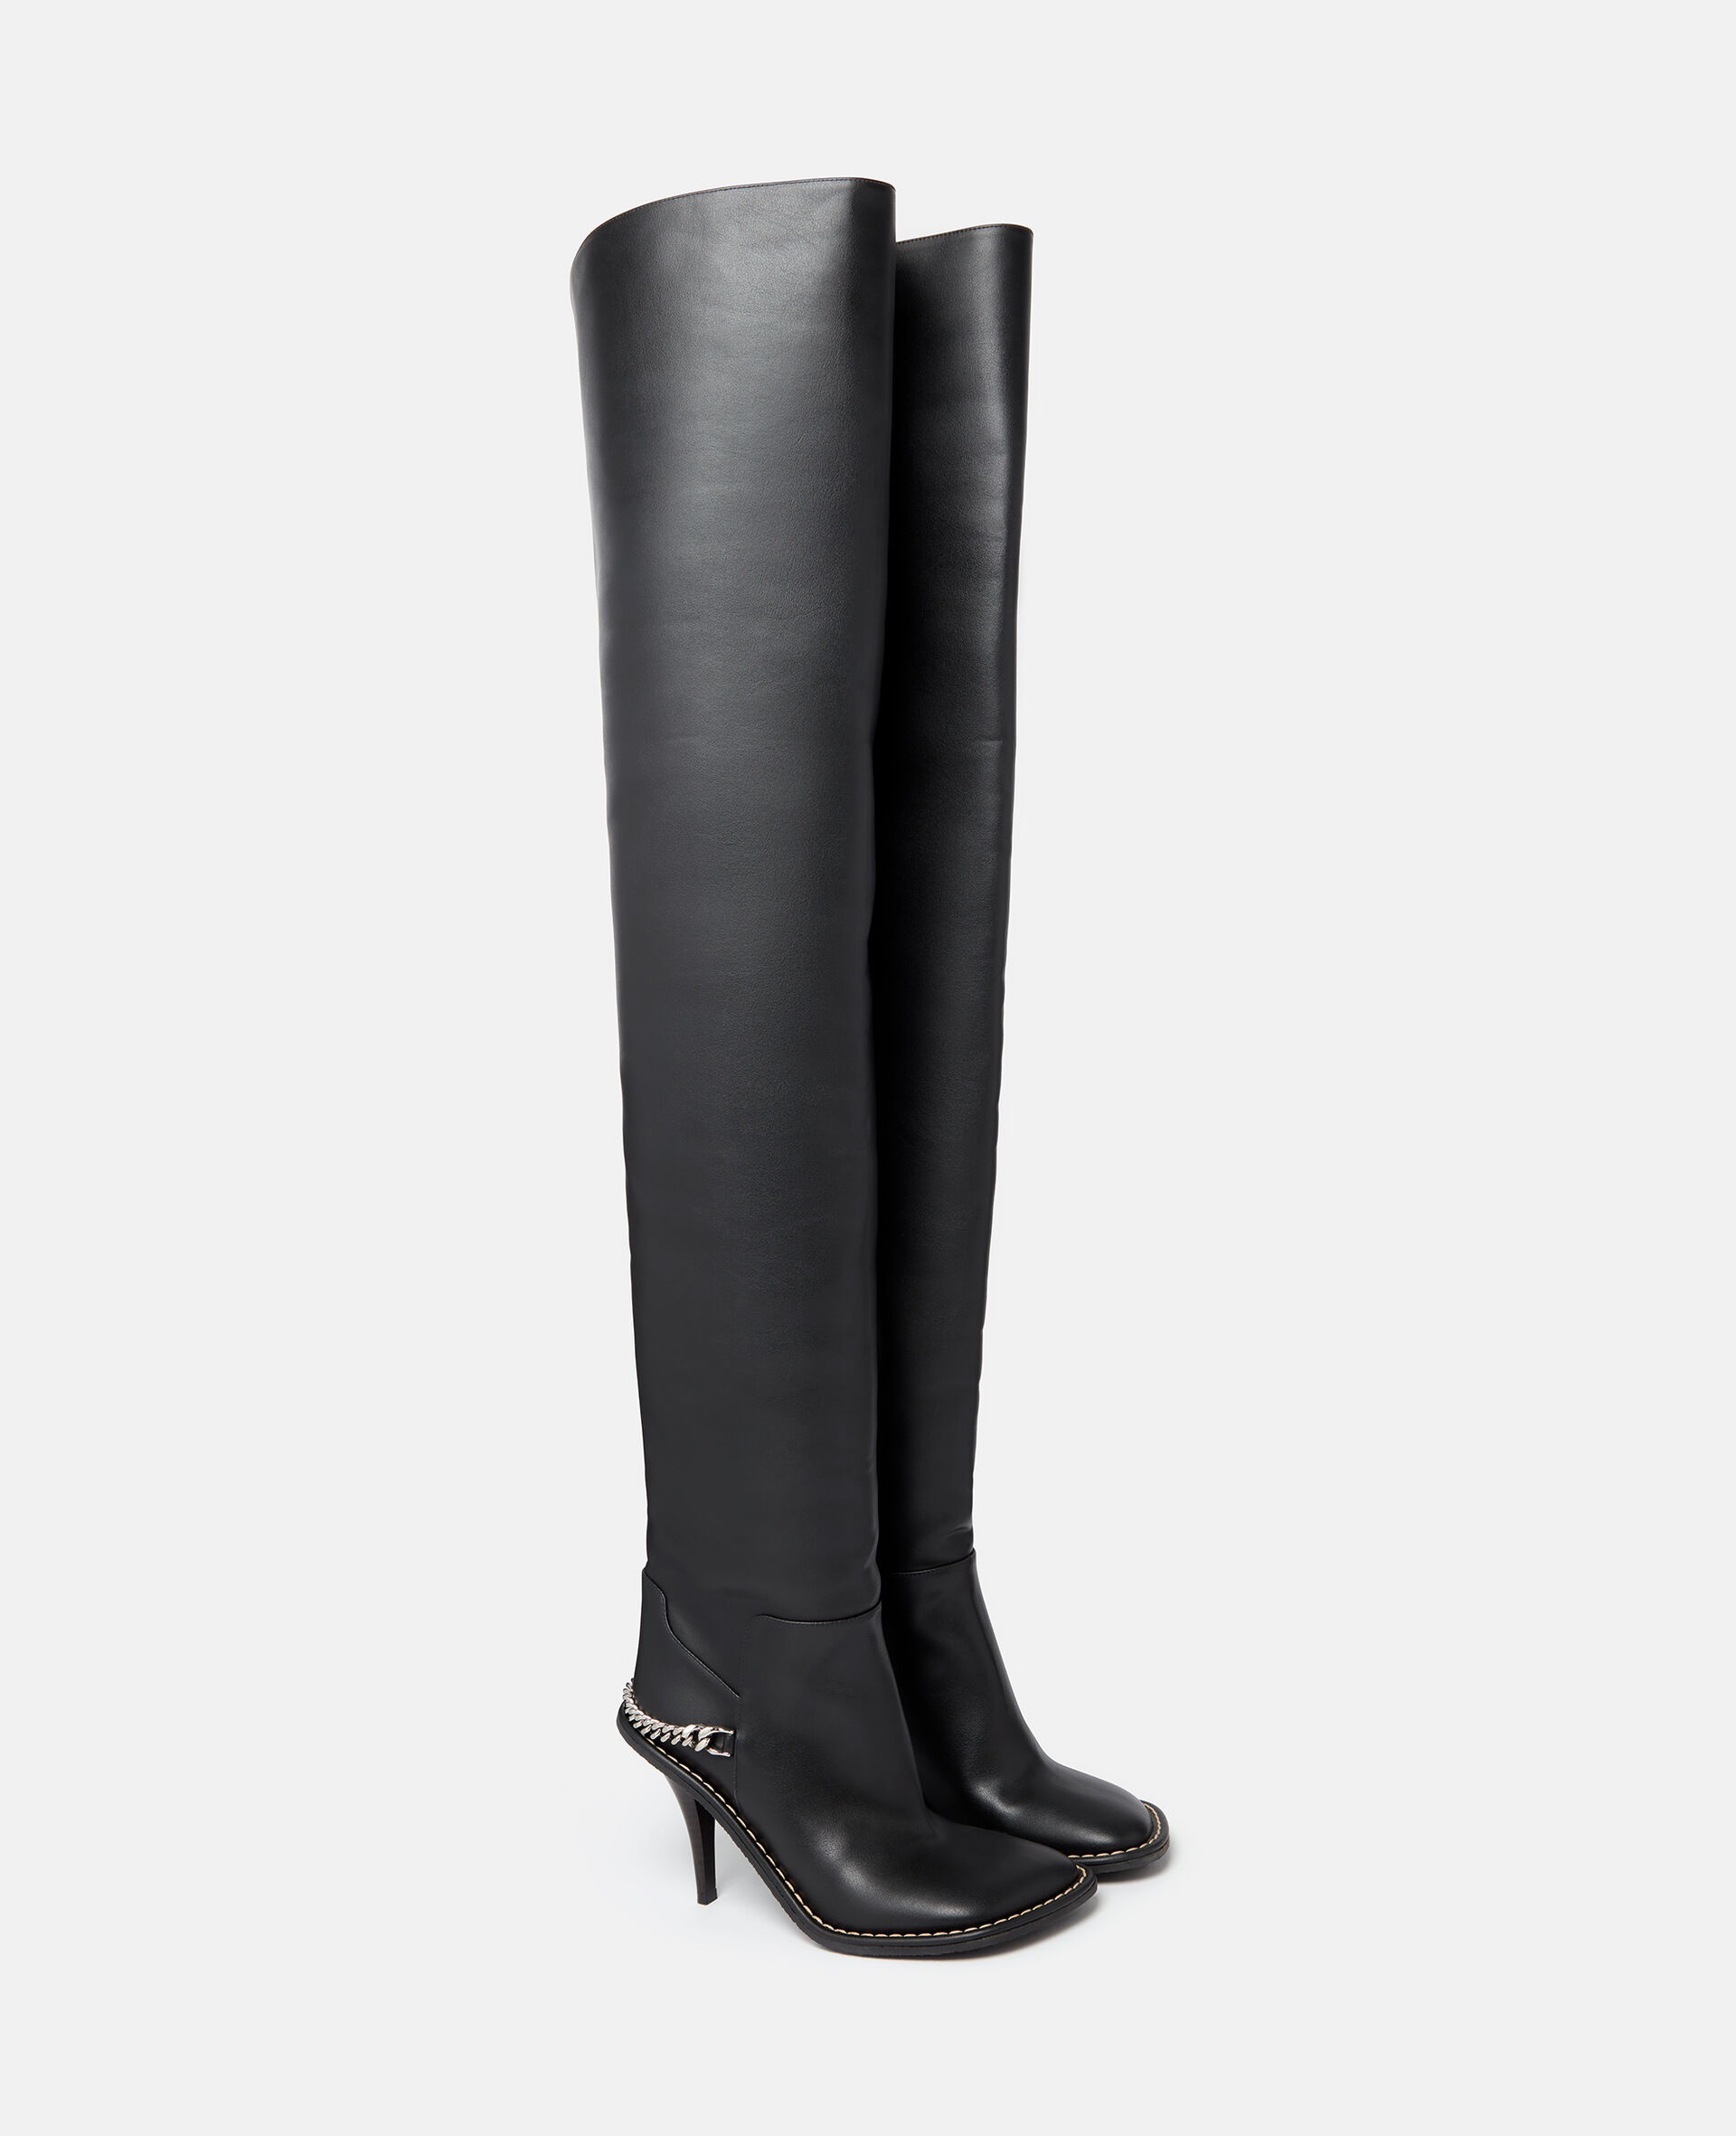 Ryder Above-the-Knee Stiletto Boots - 4